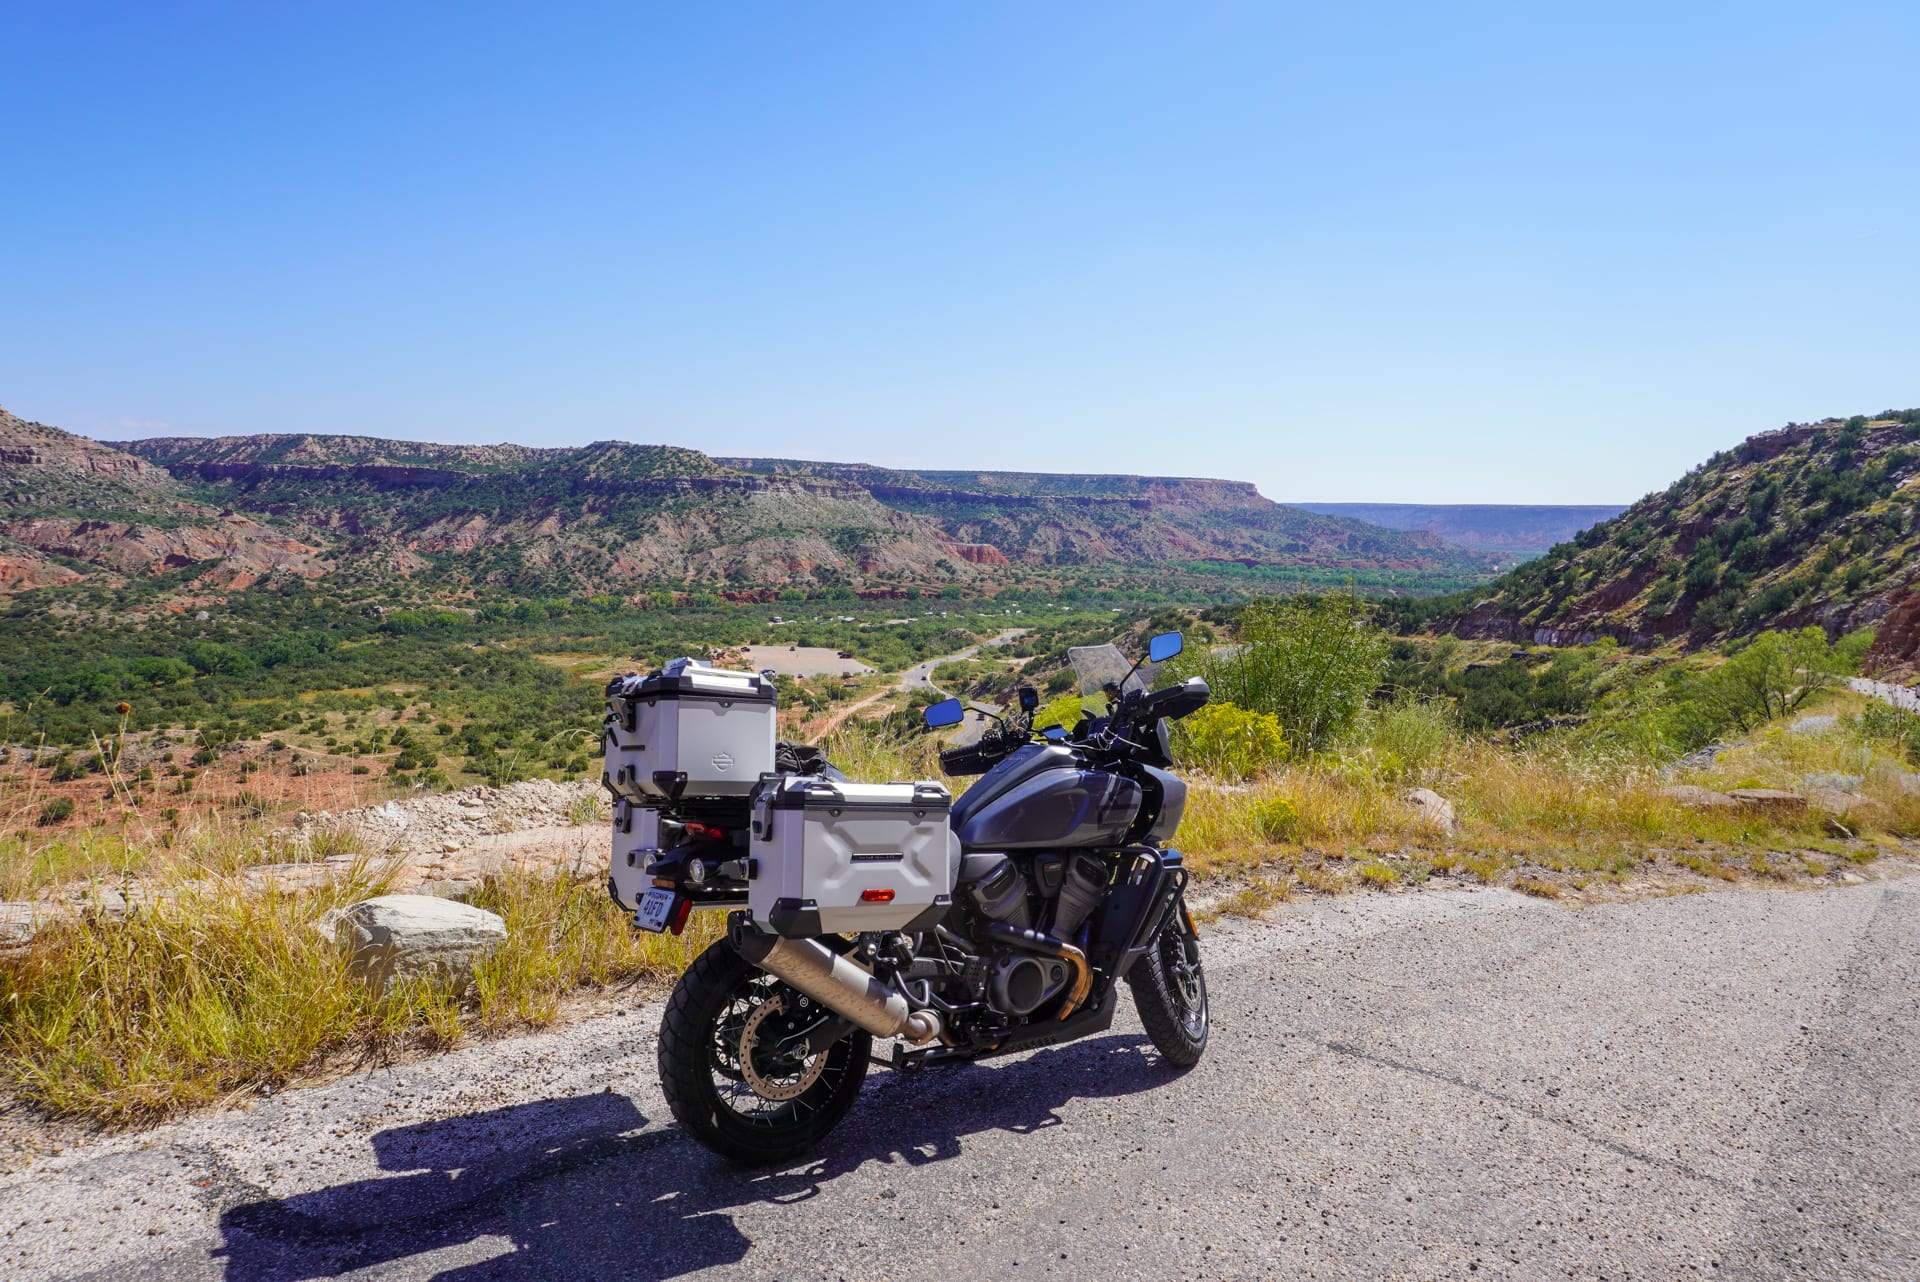 A motorcycle parked at the top of a scenic canyon